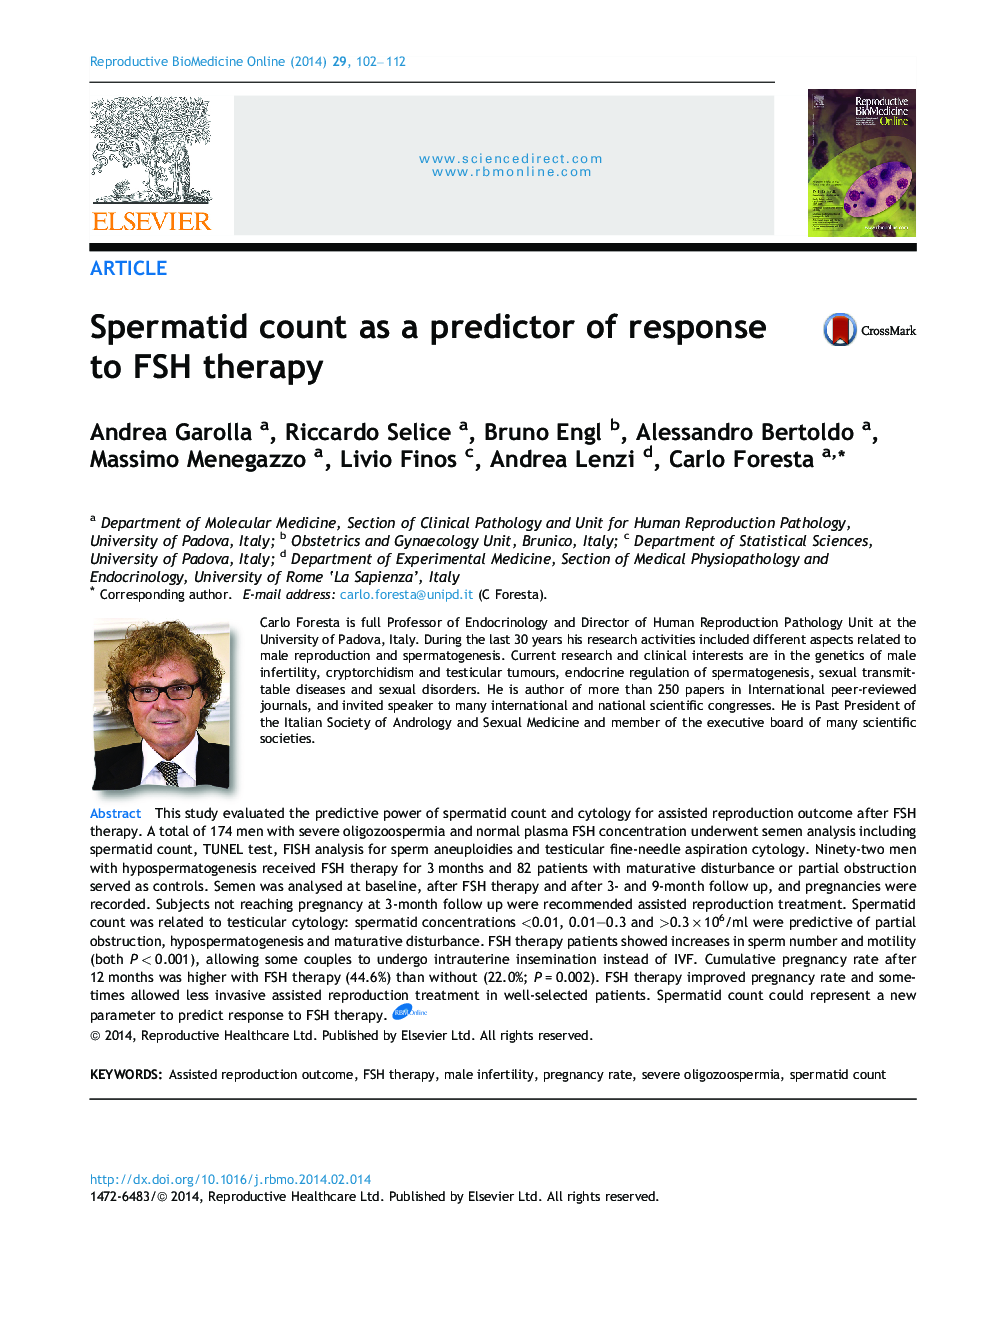 Spermatid count as a predictor of response to FSH therapy 